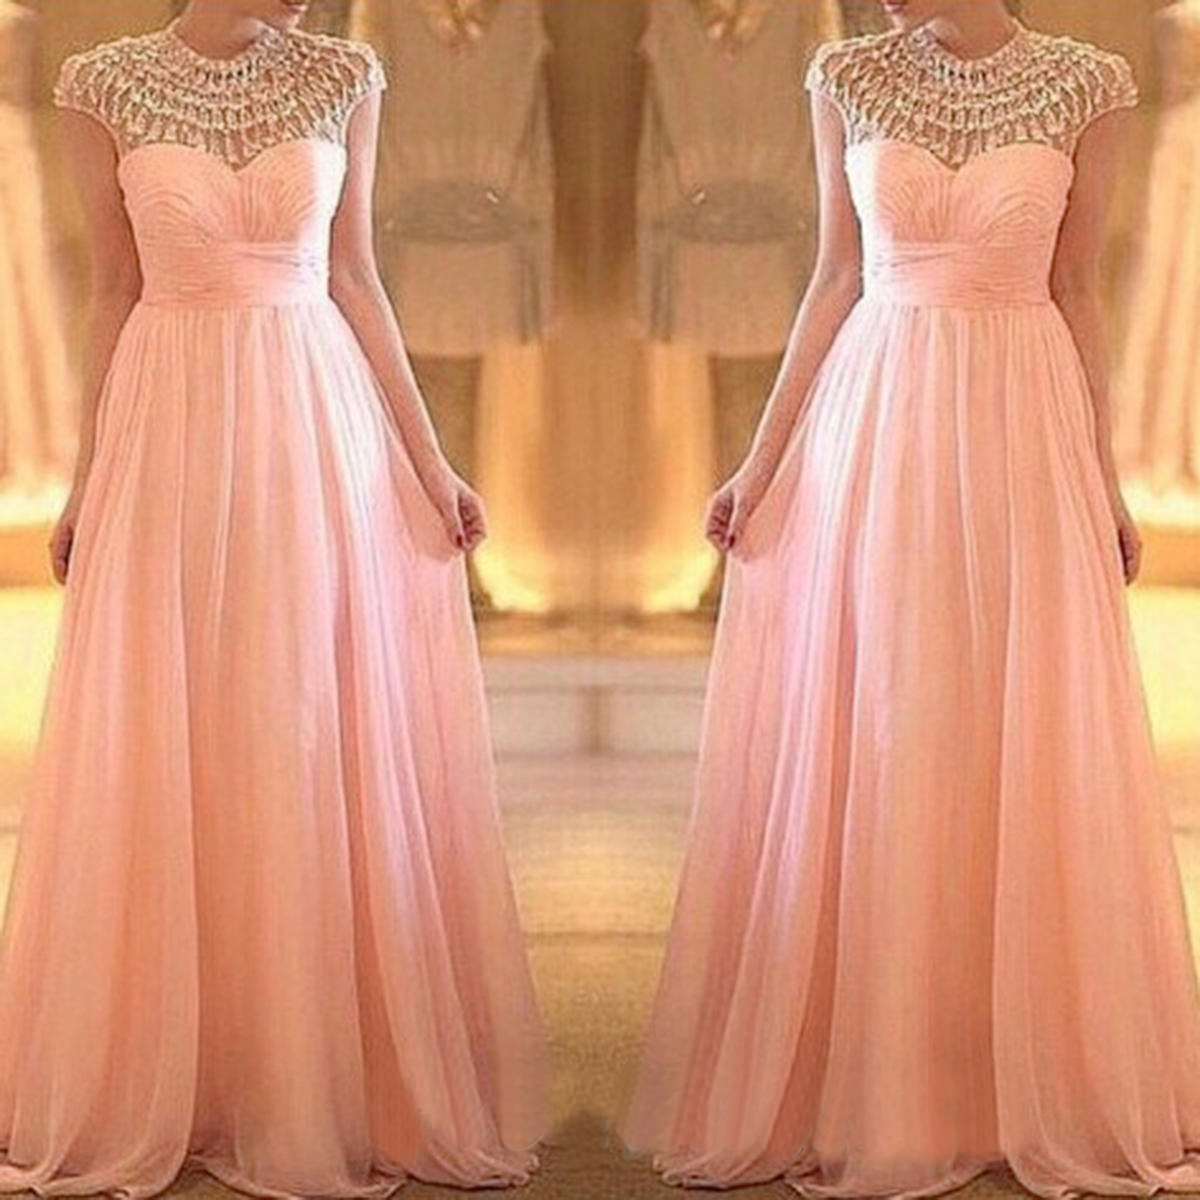 High-neck Rhinestones Pearl Pink A-line Floor Length Prom Dress Formal Party Dress